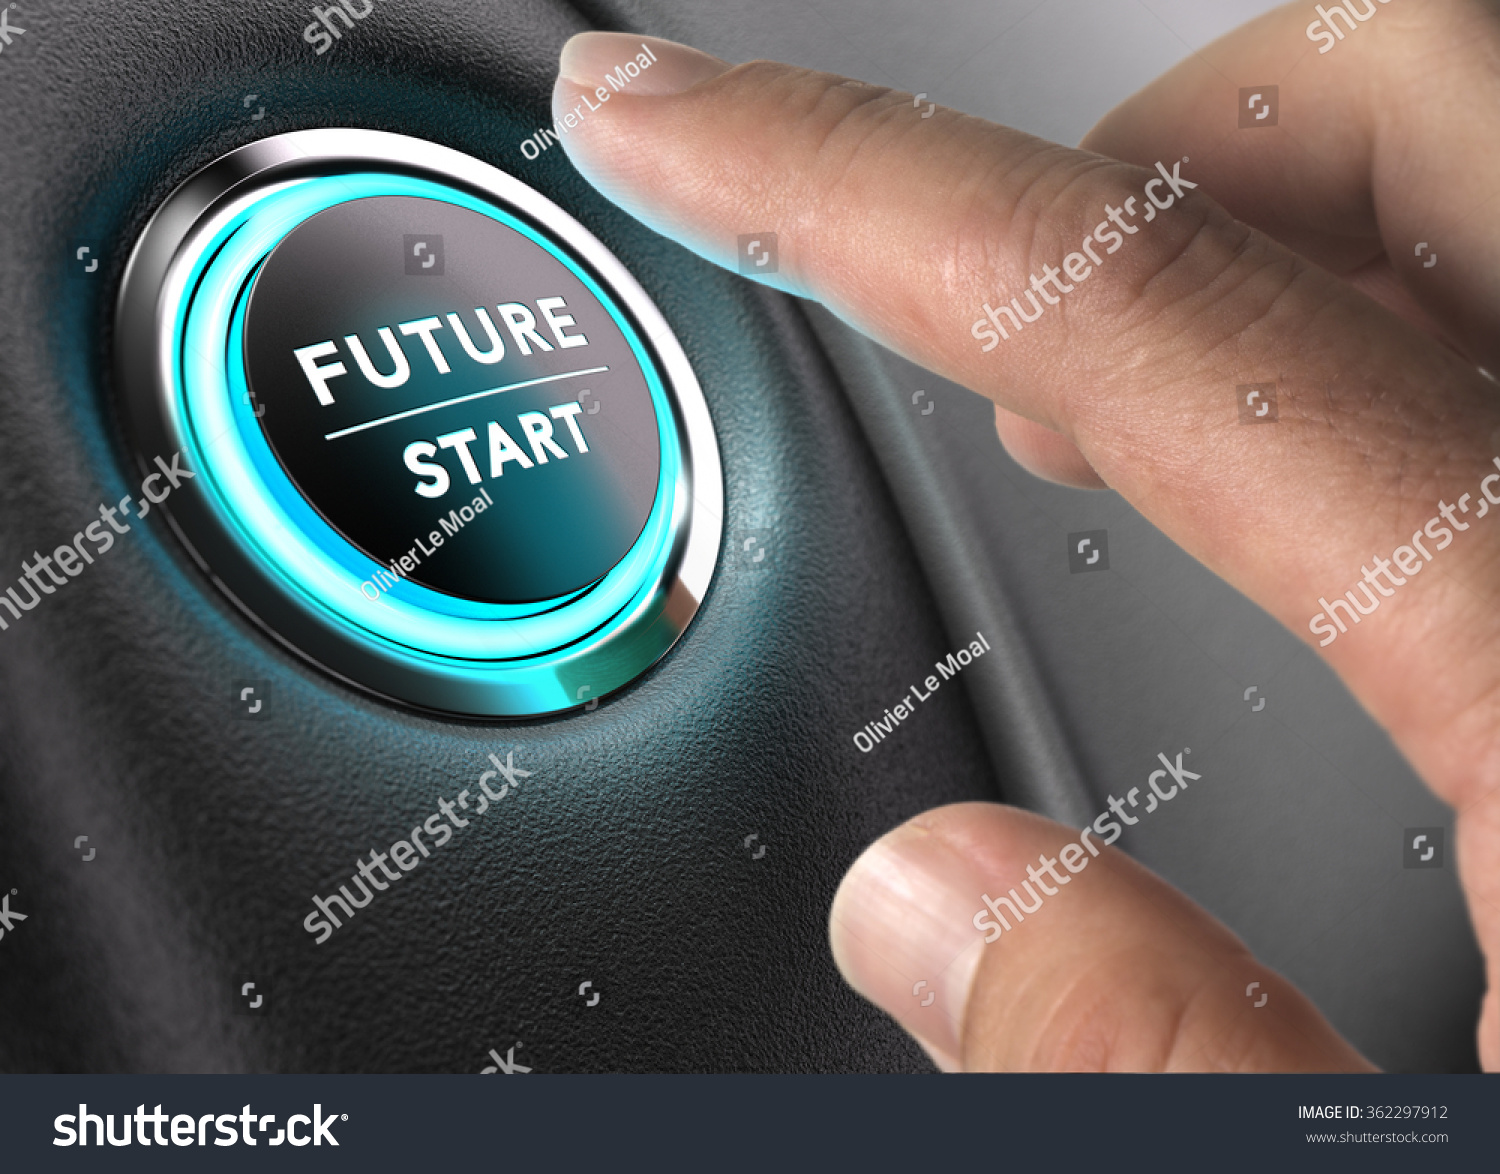 Finger about to press future button with blue light over black and grey background. Concept image for illustration of change or strategic vision. #362297912